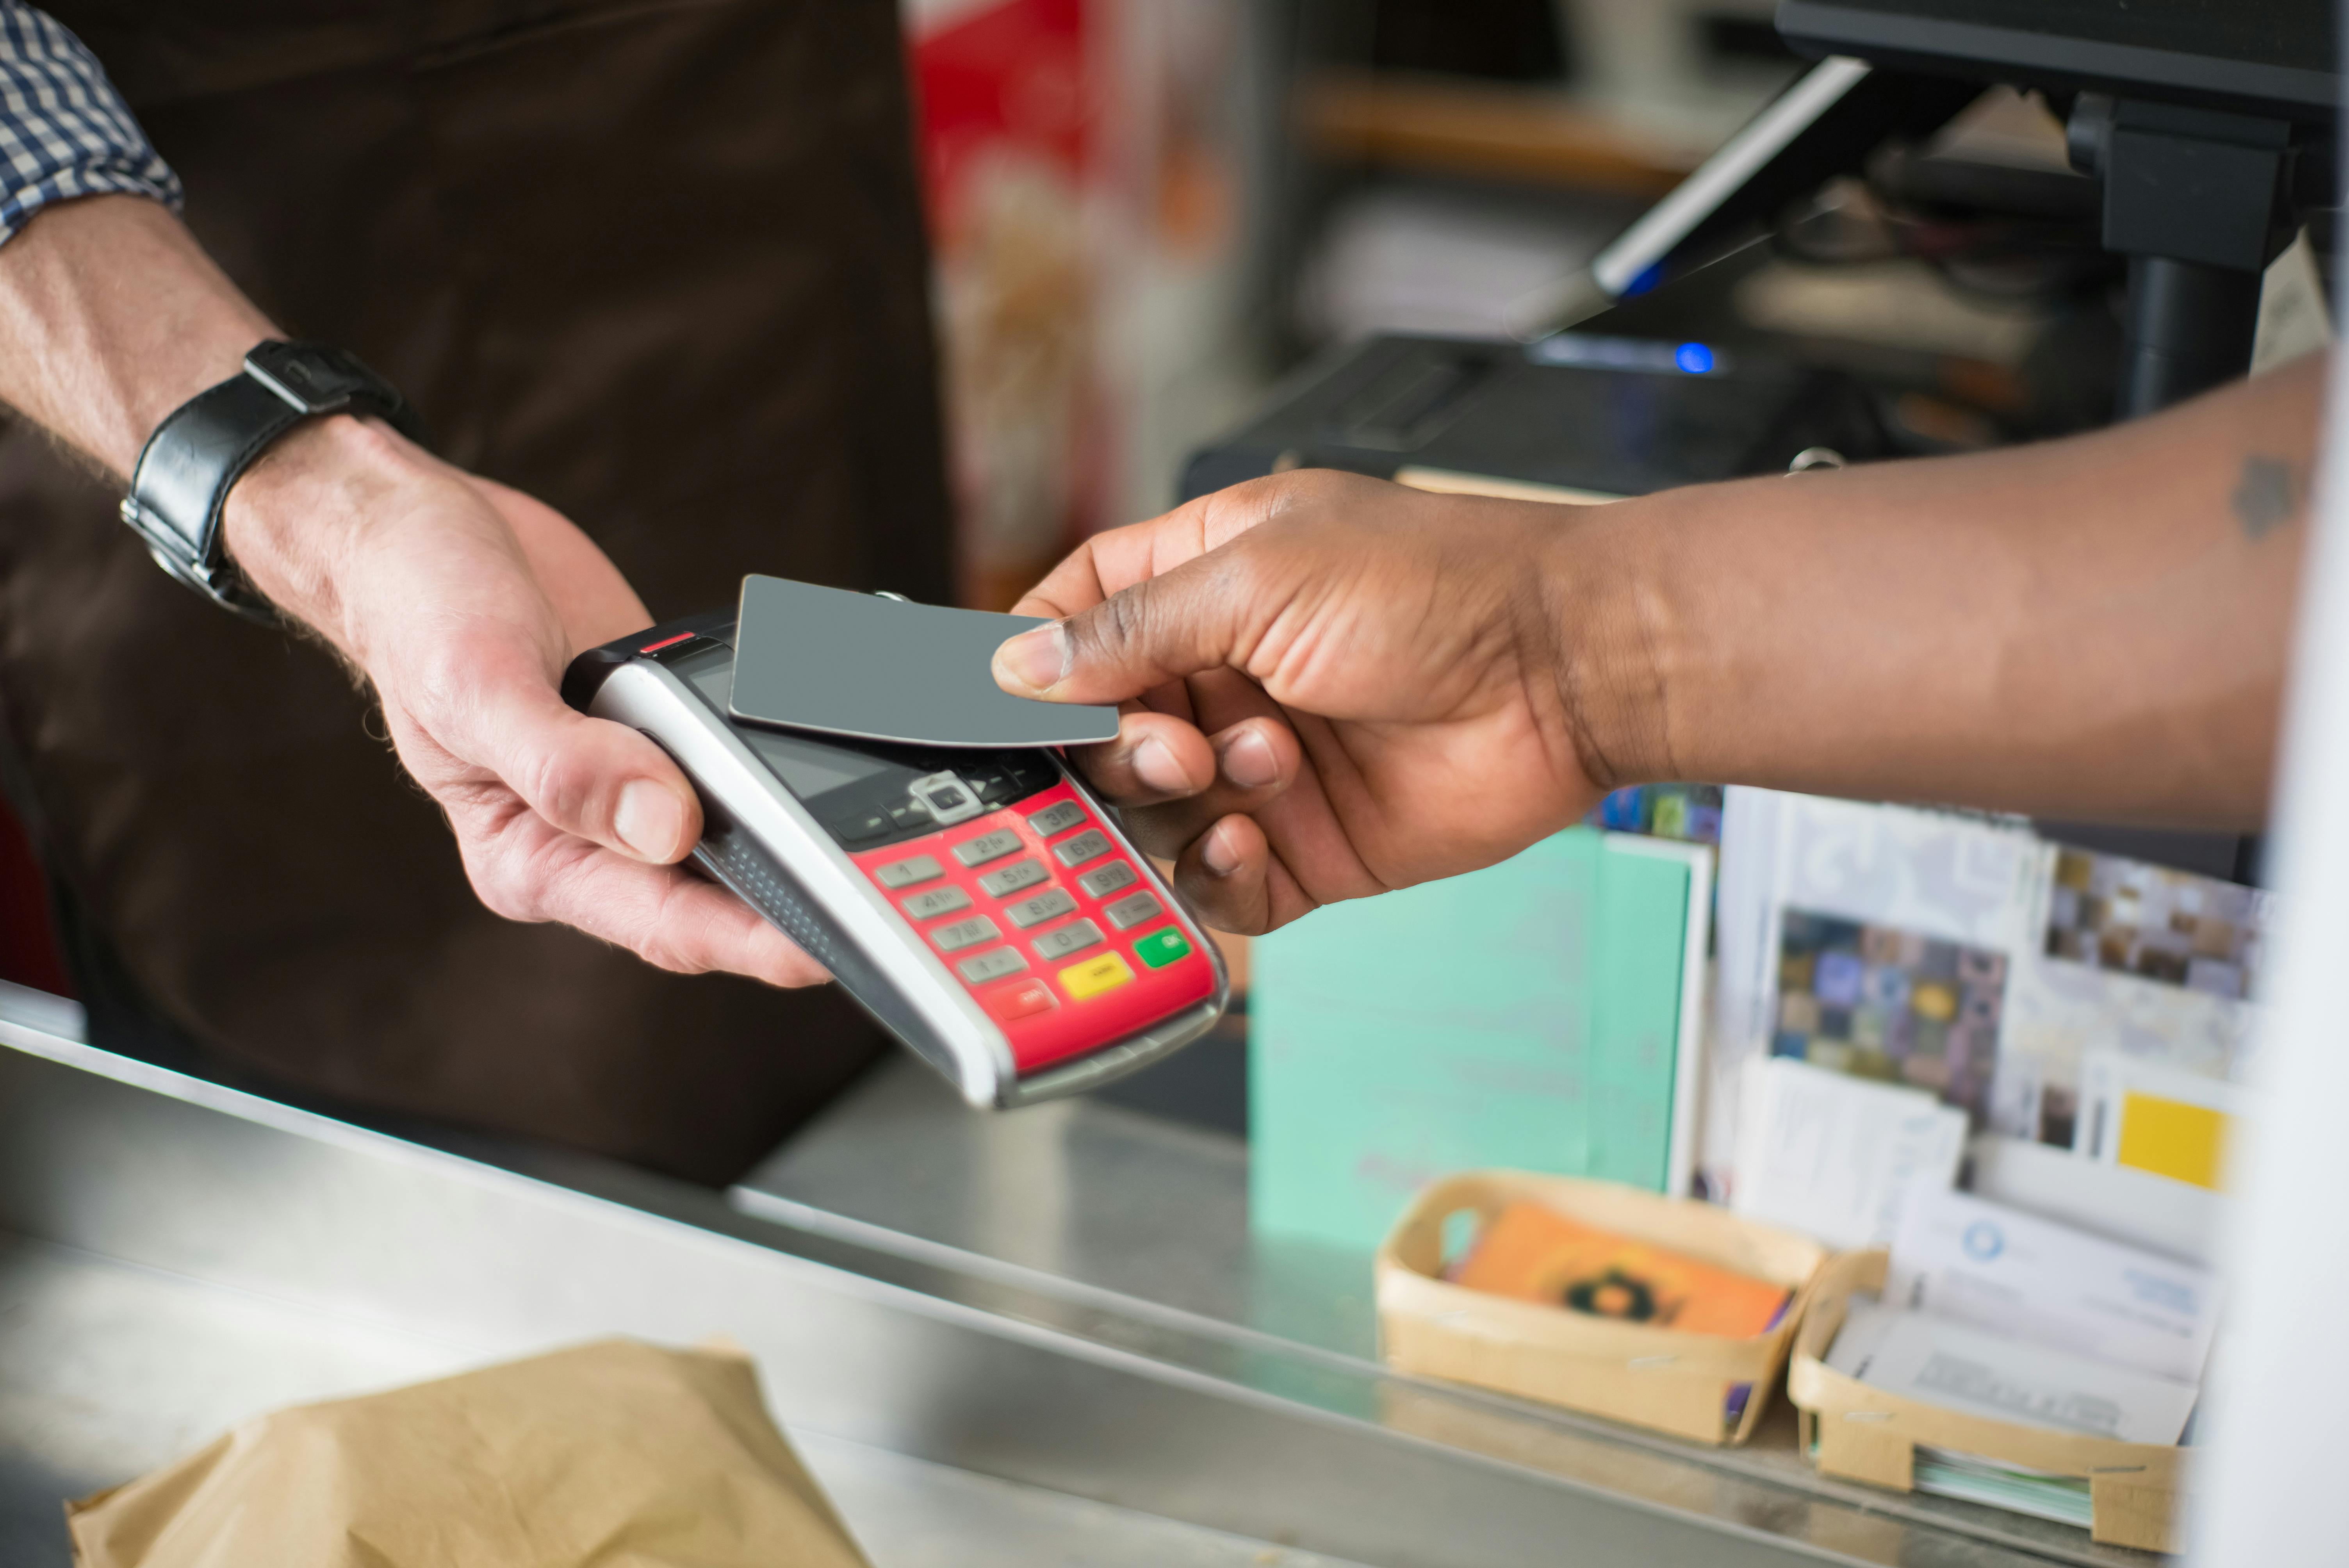 A person paying using a bank card | Source: Pexels